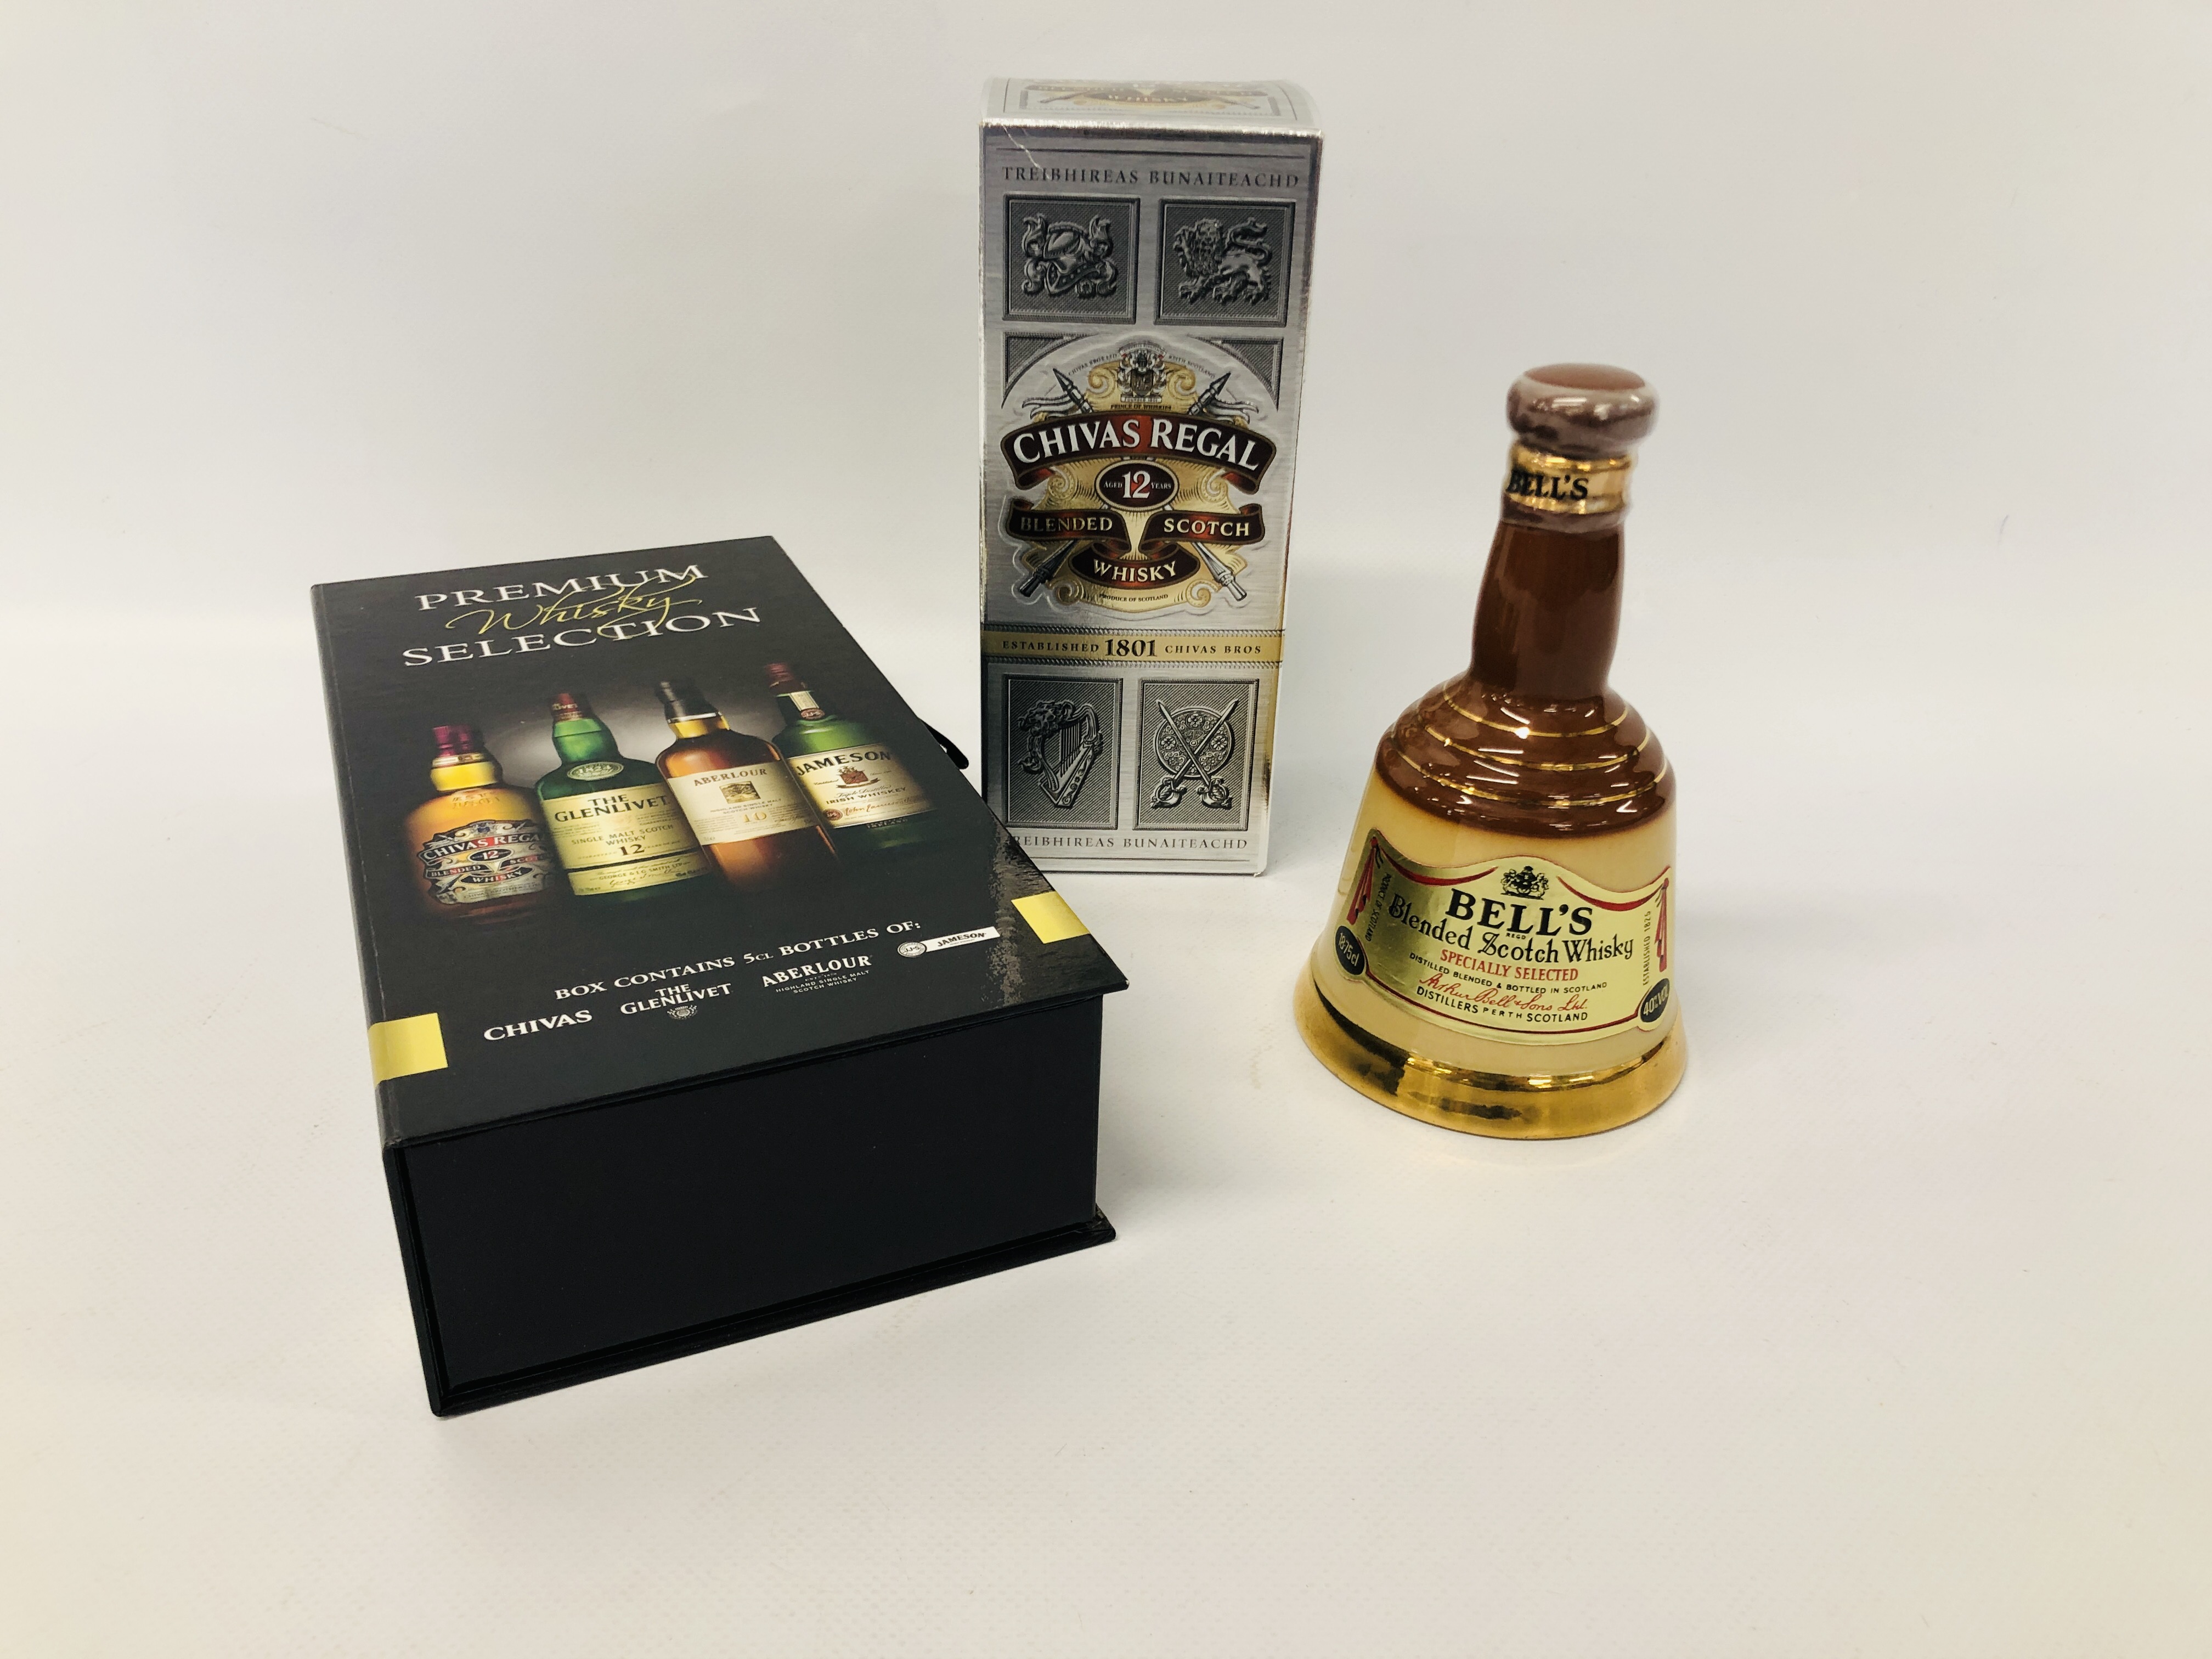 CHIVAS REGAL SCOTCH WHISKY 350ML (BOXED), WADE BELLS WHISKY 18.